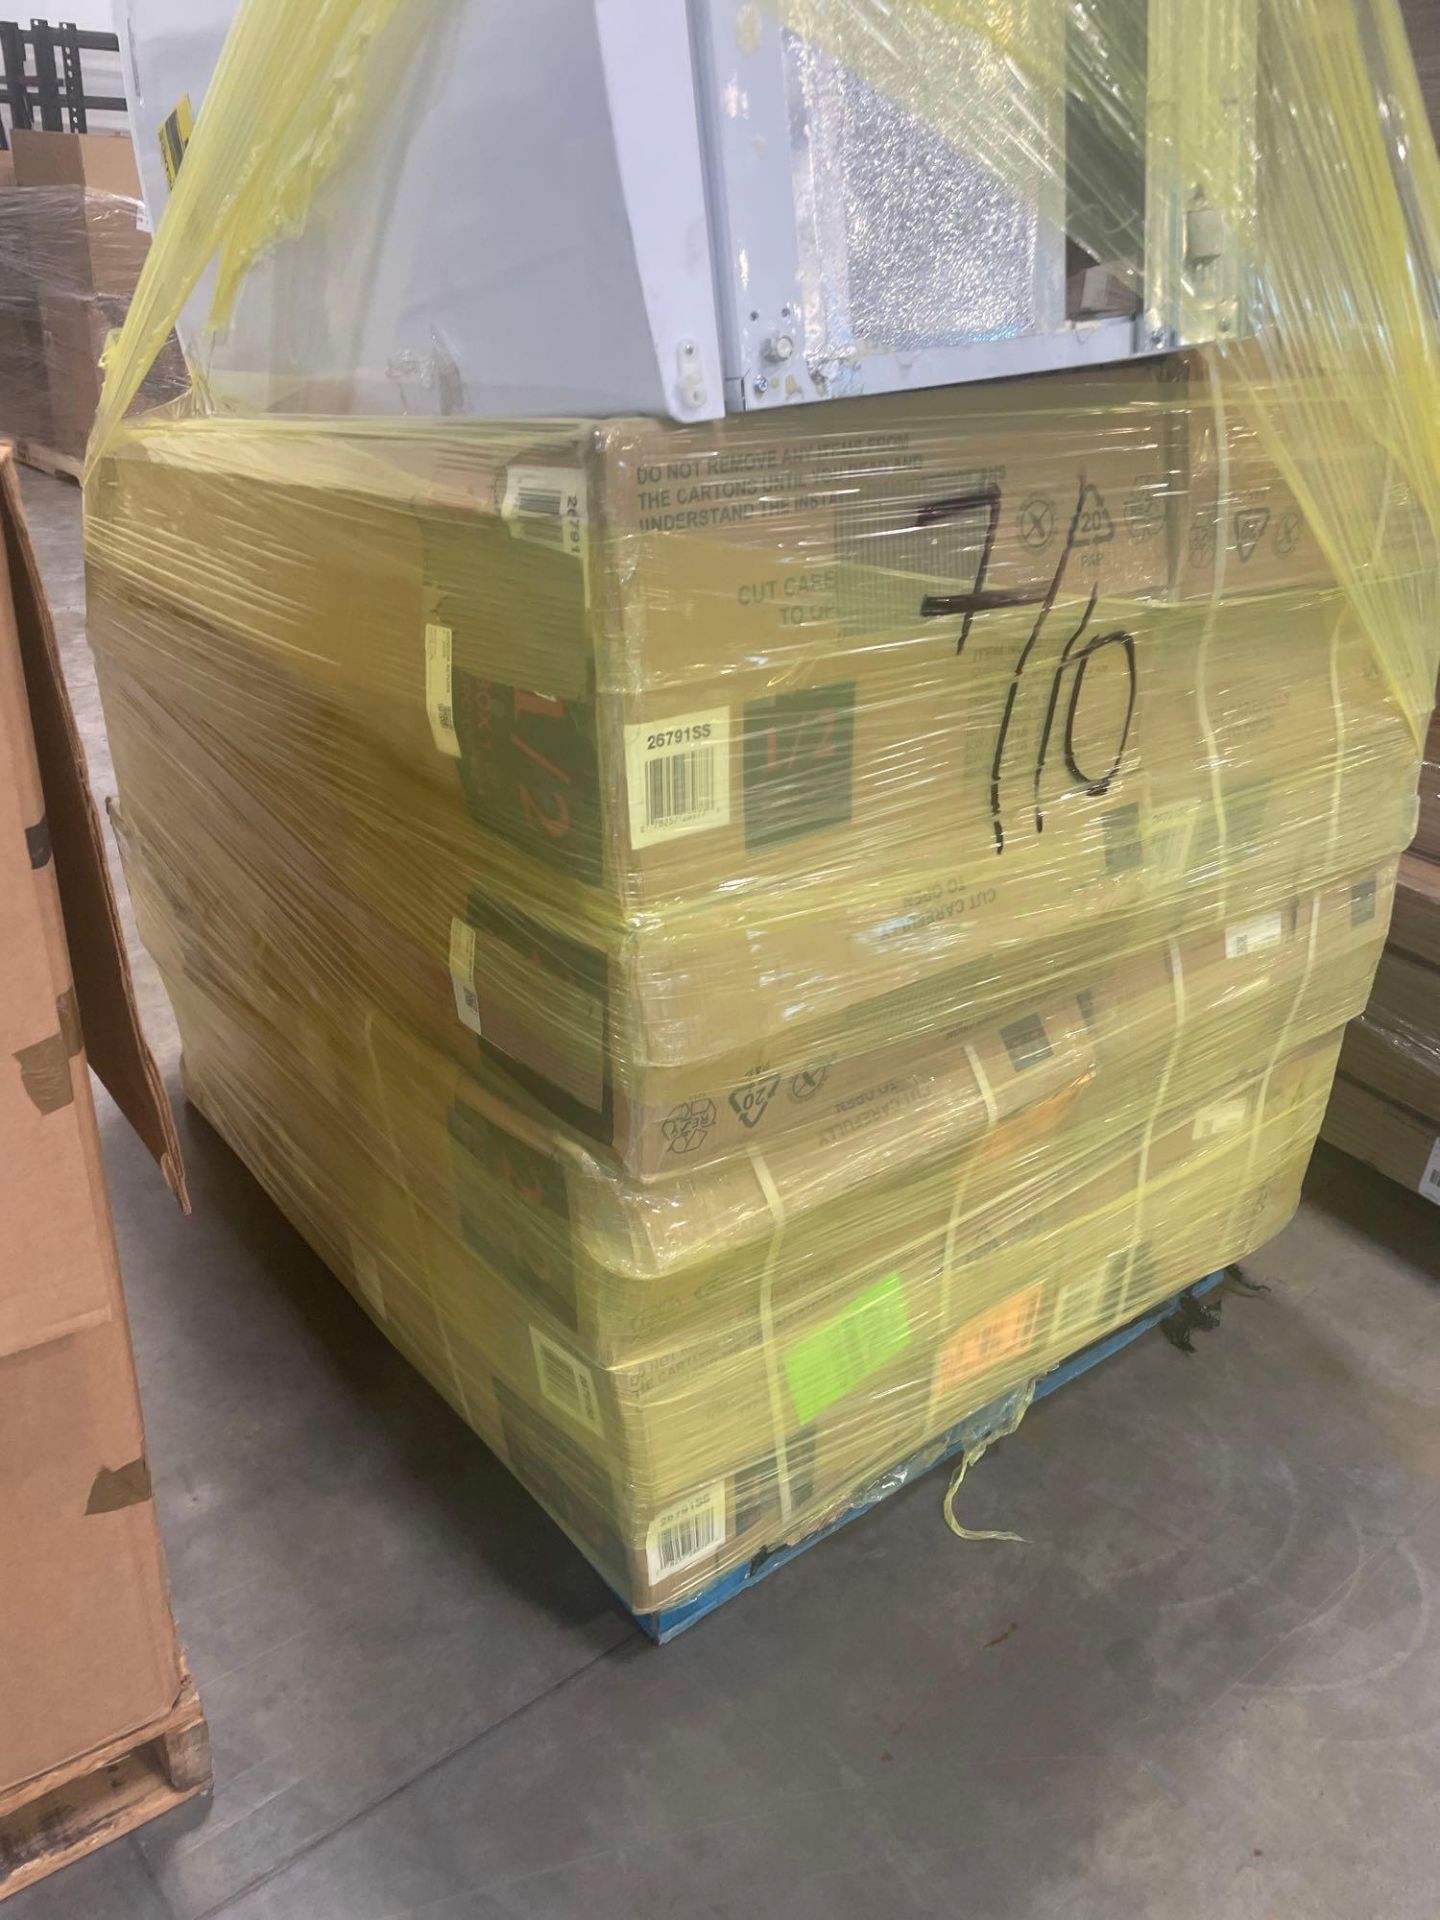 pallet of fridge and Intex prism frame rectangular pools appear to be multiple units - Bild 7 aus 7